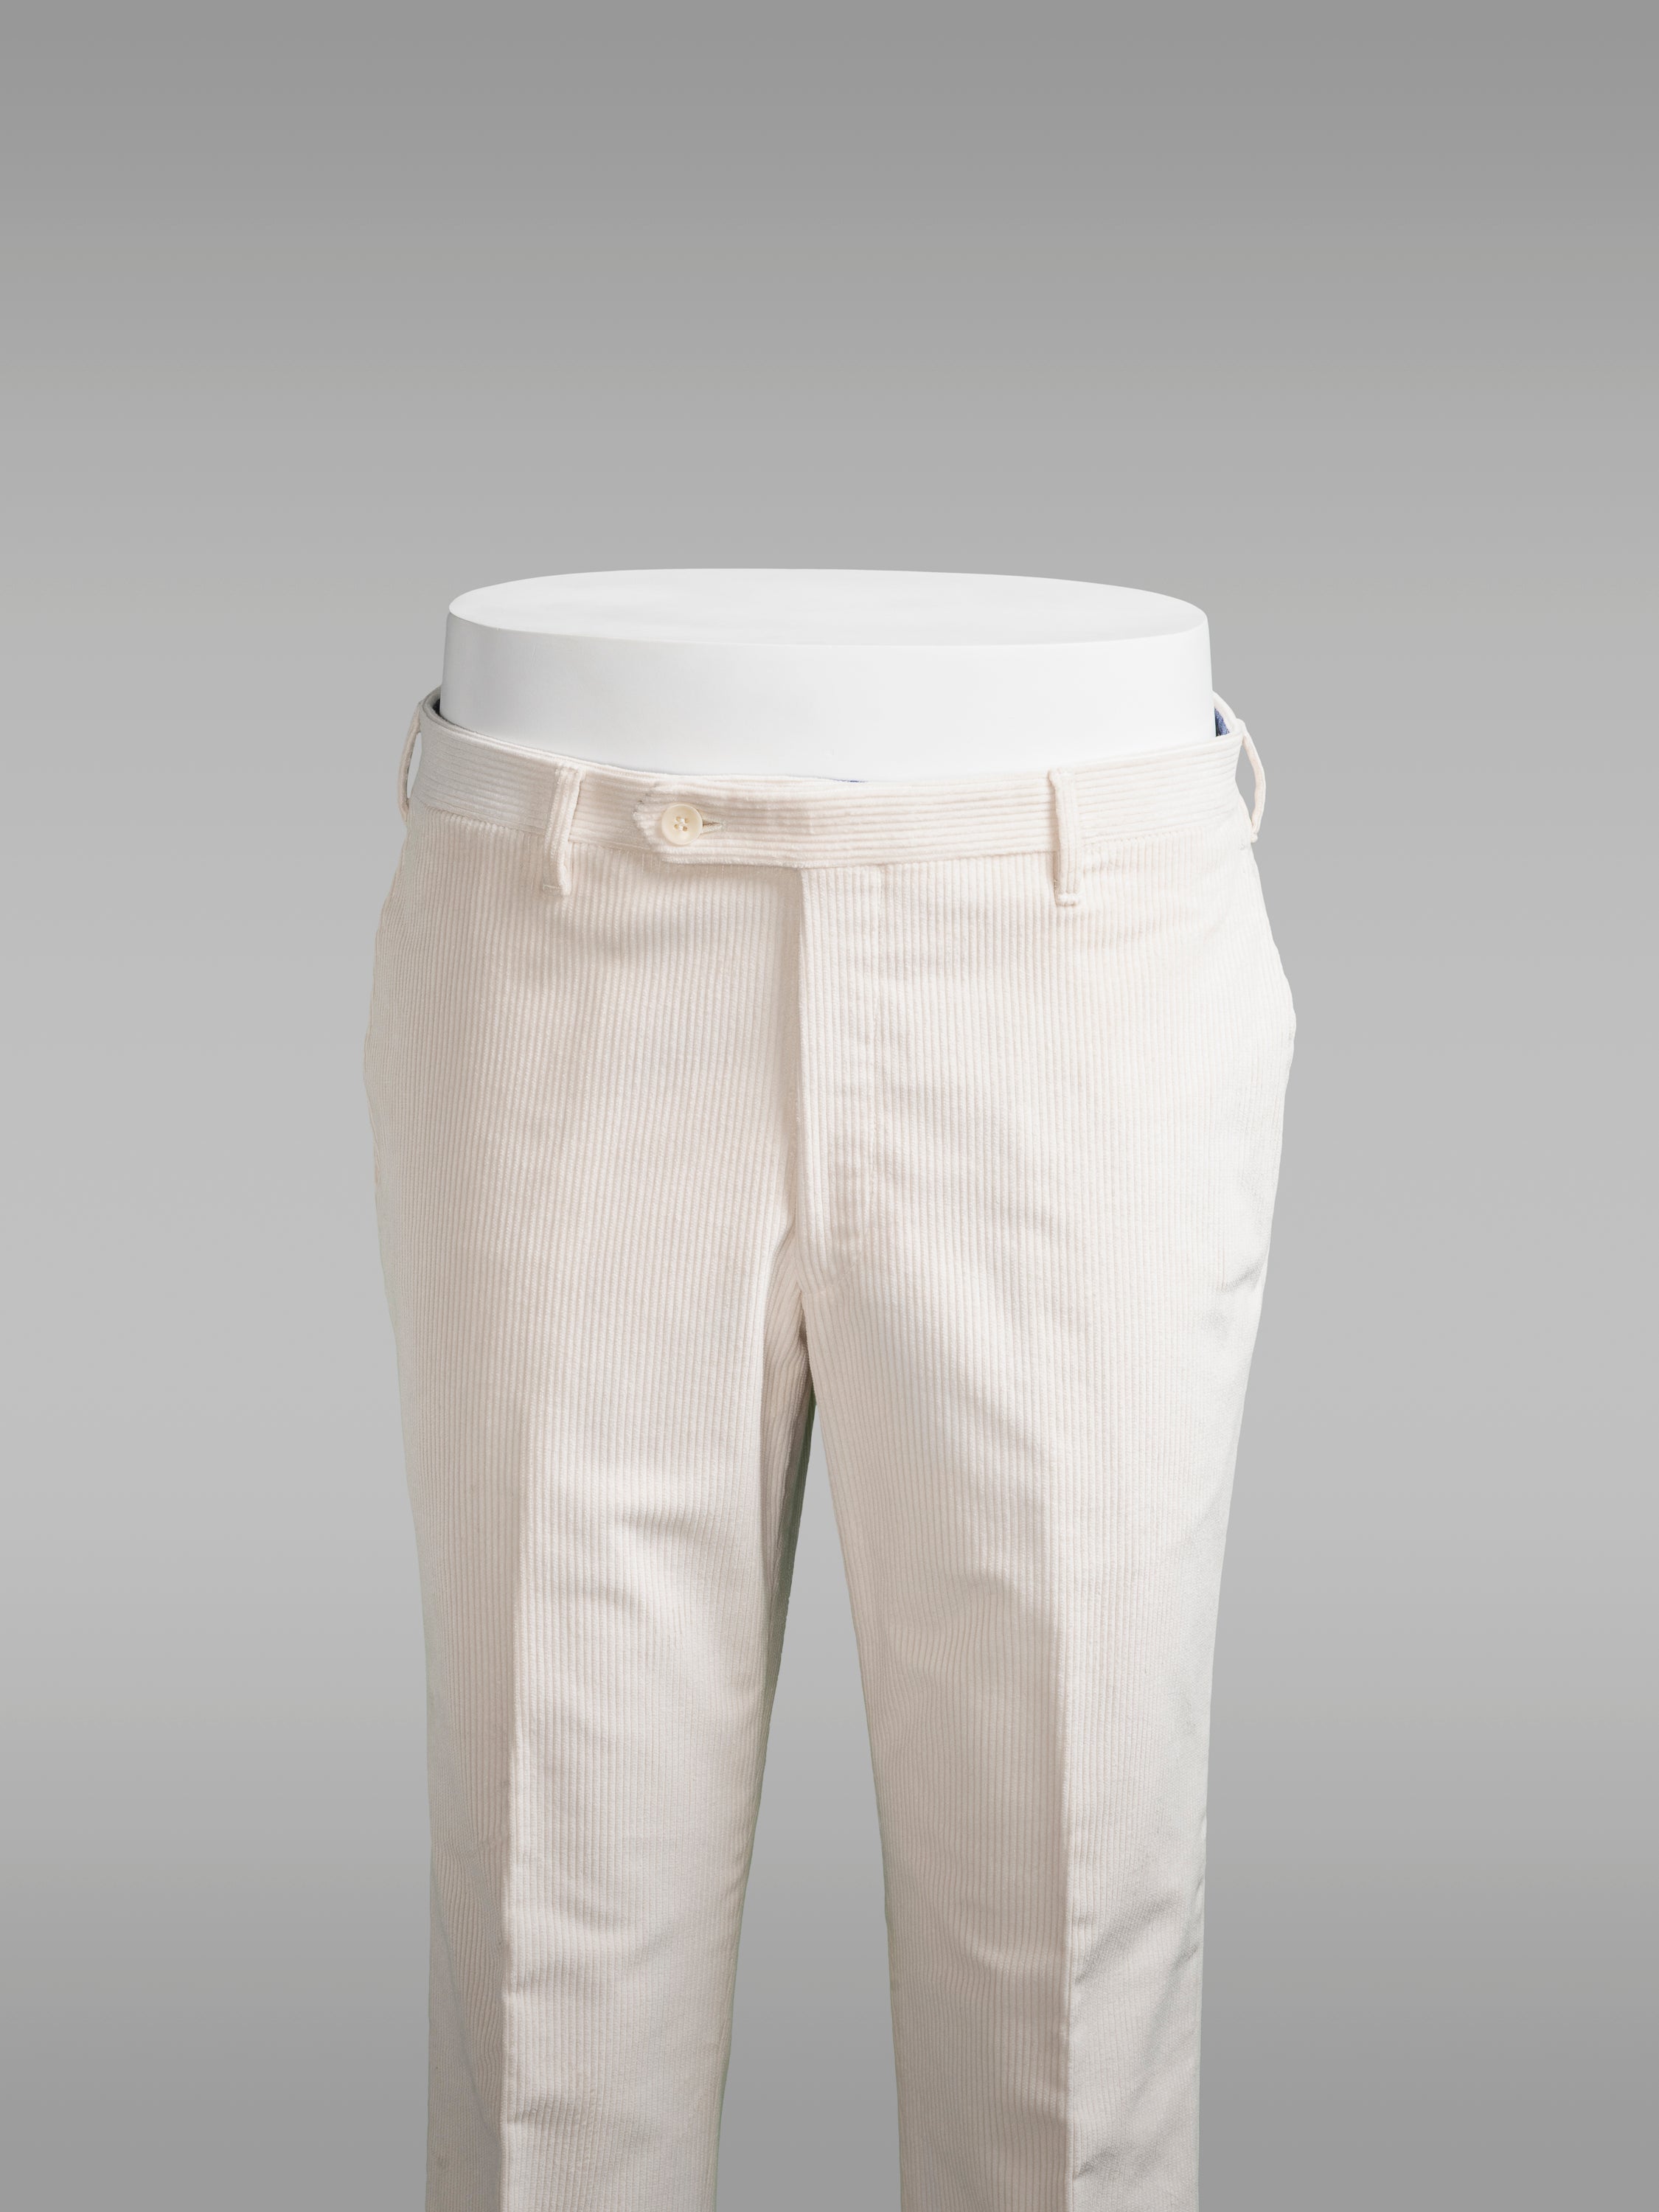 Off White Warm Woolen Trouser Or Pant - Handicrafts In Nepal